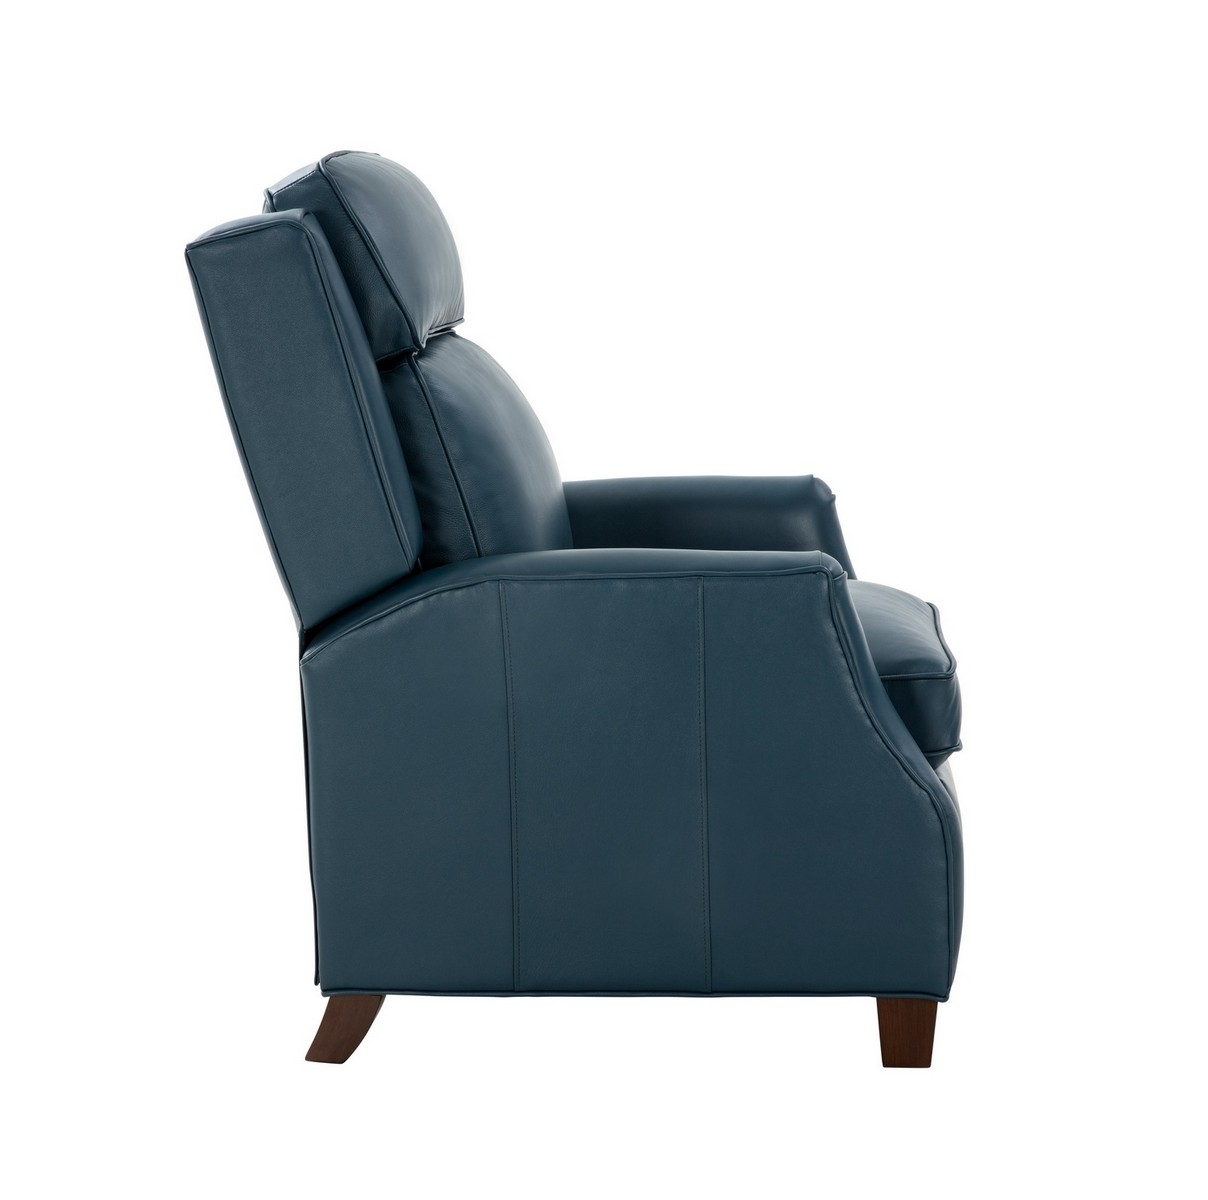 Barcalounger Nixon Recliner Chair - Prestin Yale Blue/All Leather